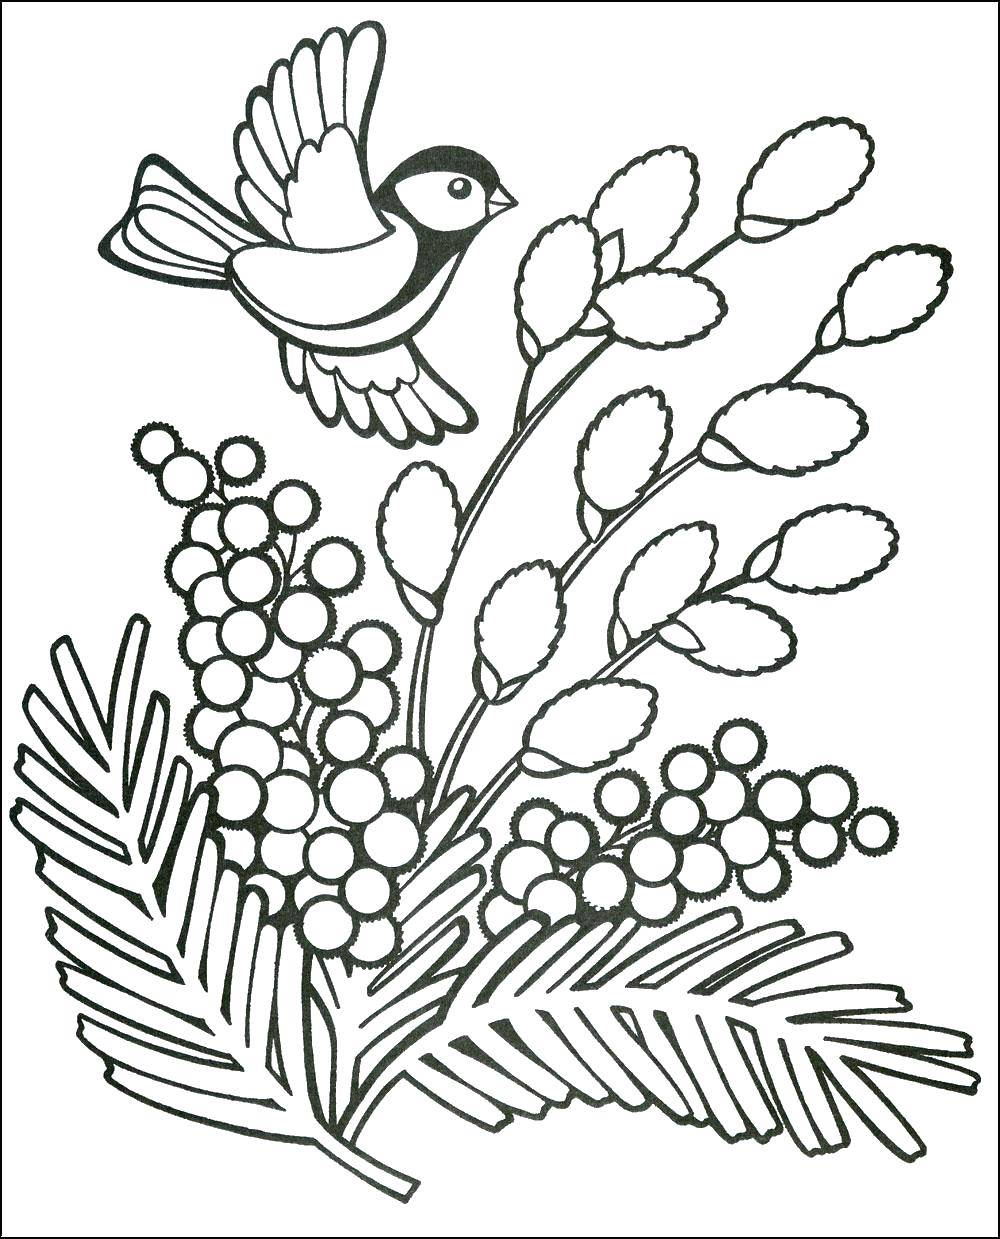 Coloring The bird with wildflowers. Category spring. Tags:  Spring, birds, flowers.